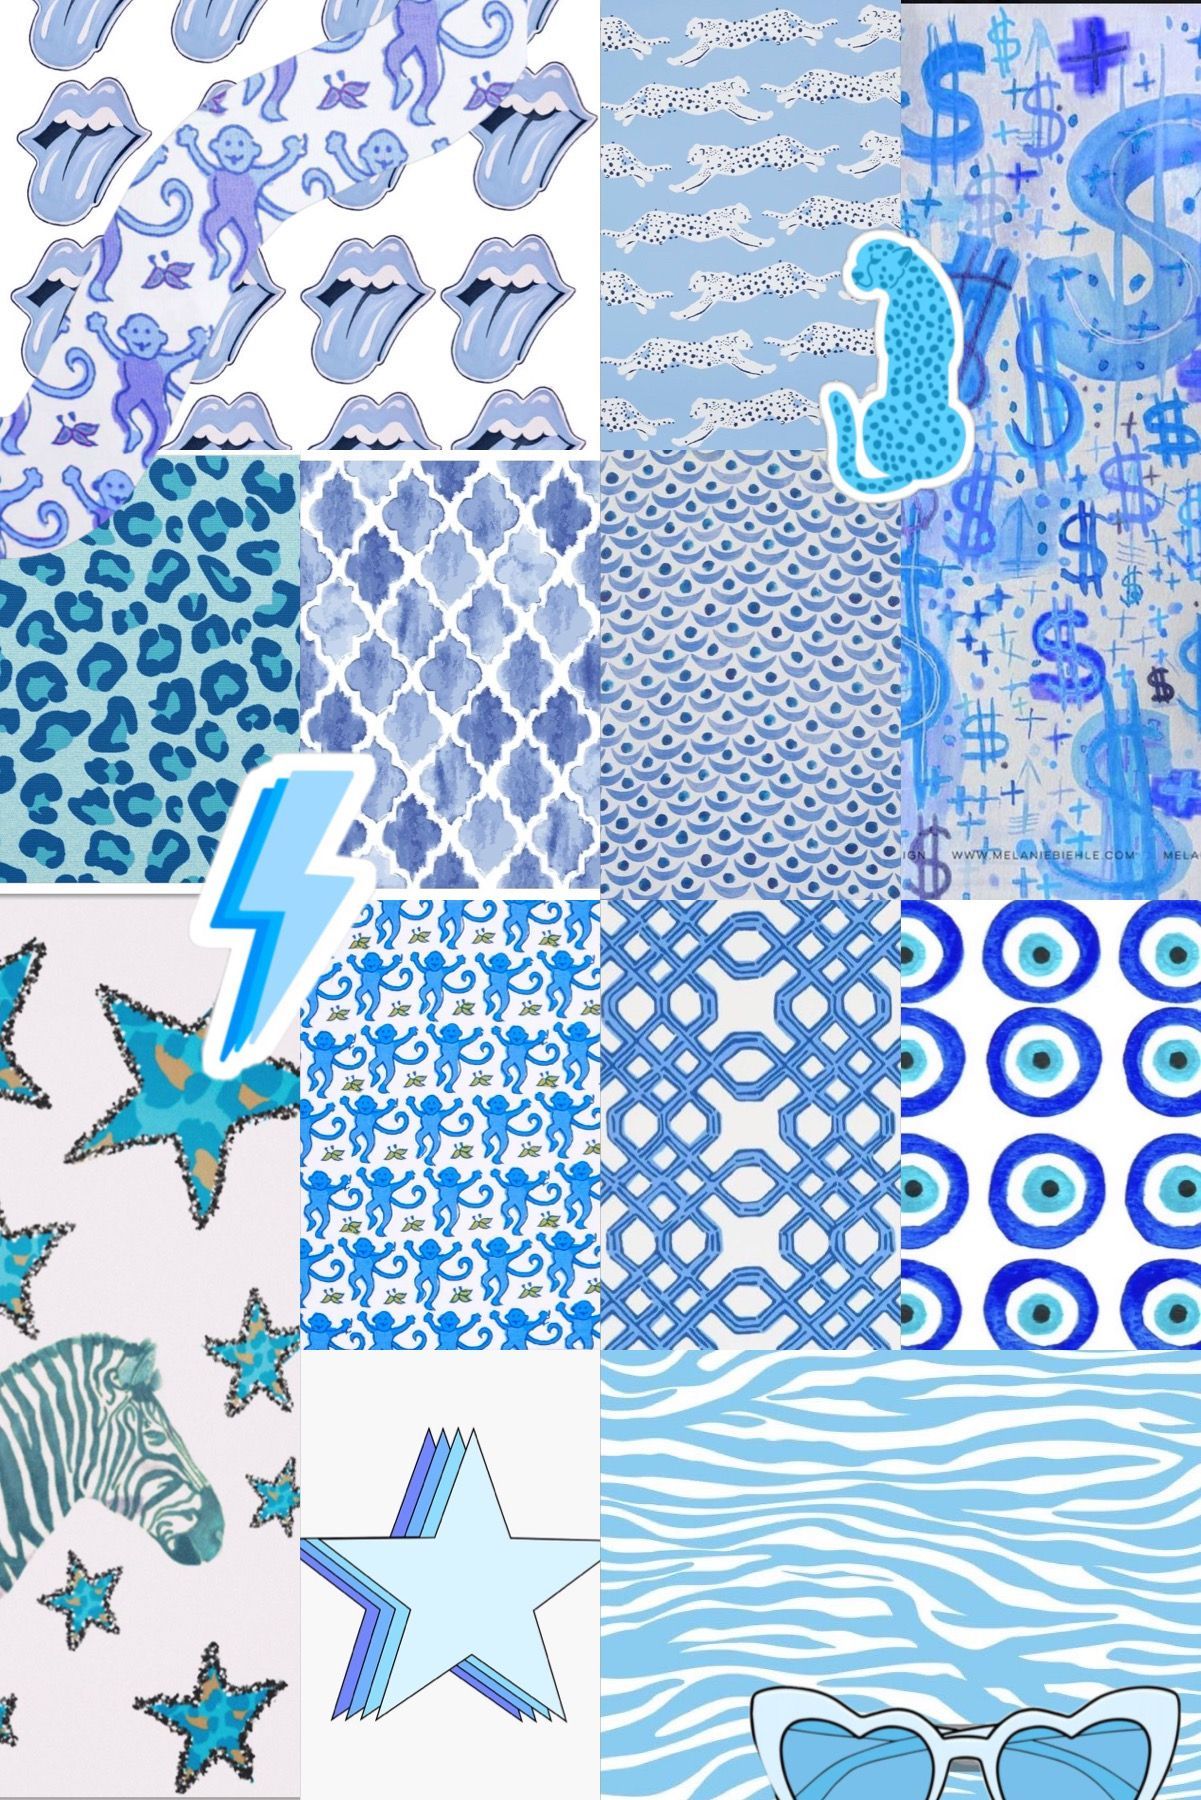 A collage of blue and white patterns including stars, zebras, and lips. - Preppy, Rolling Stones